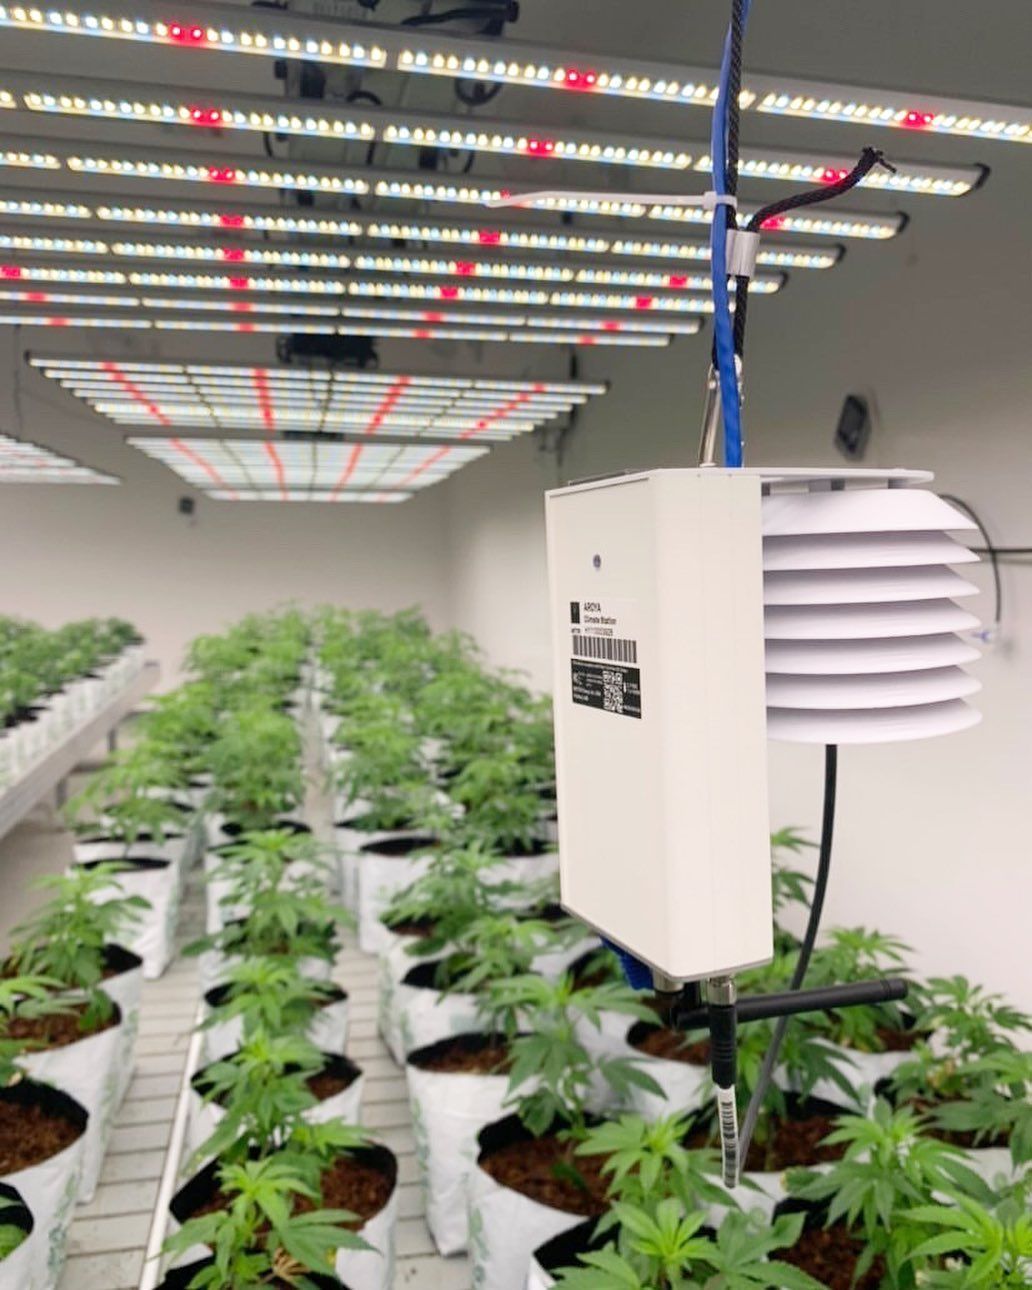 The white ATMOS sensor hanging from the ceiling with cannabis plants underneath it